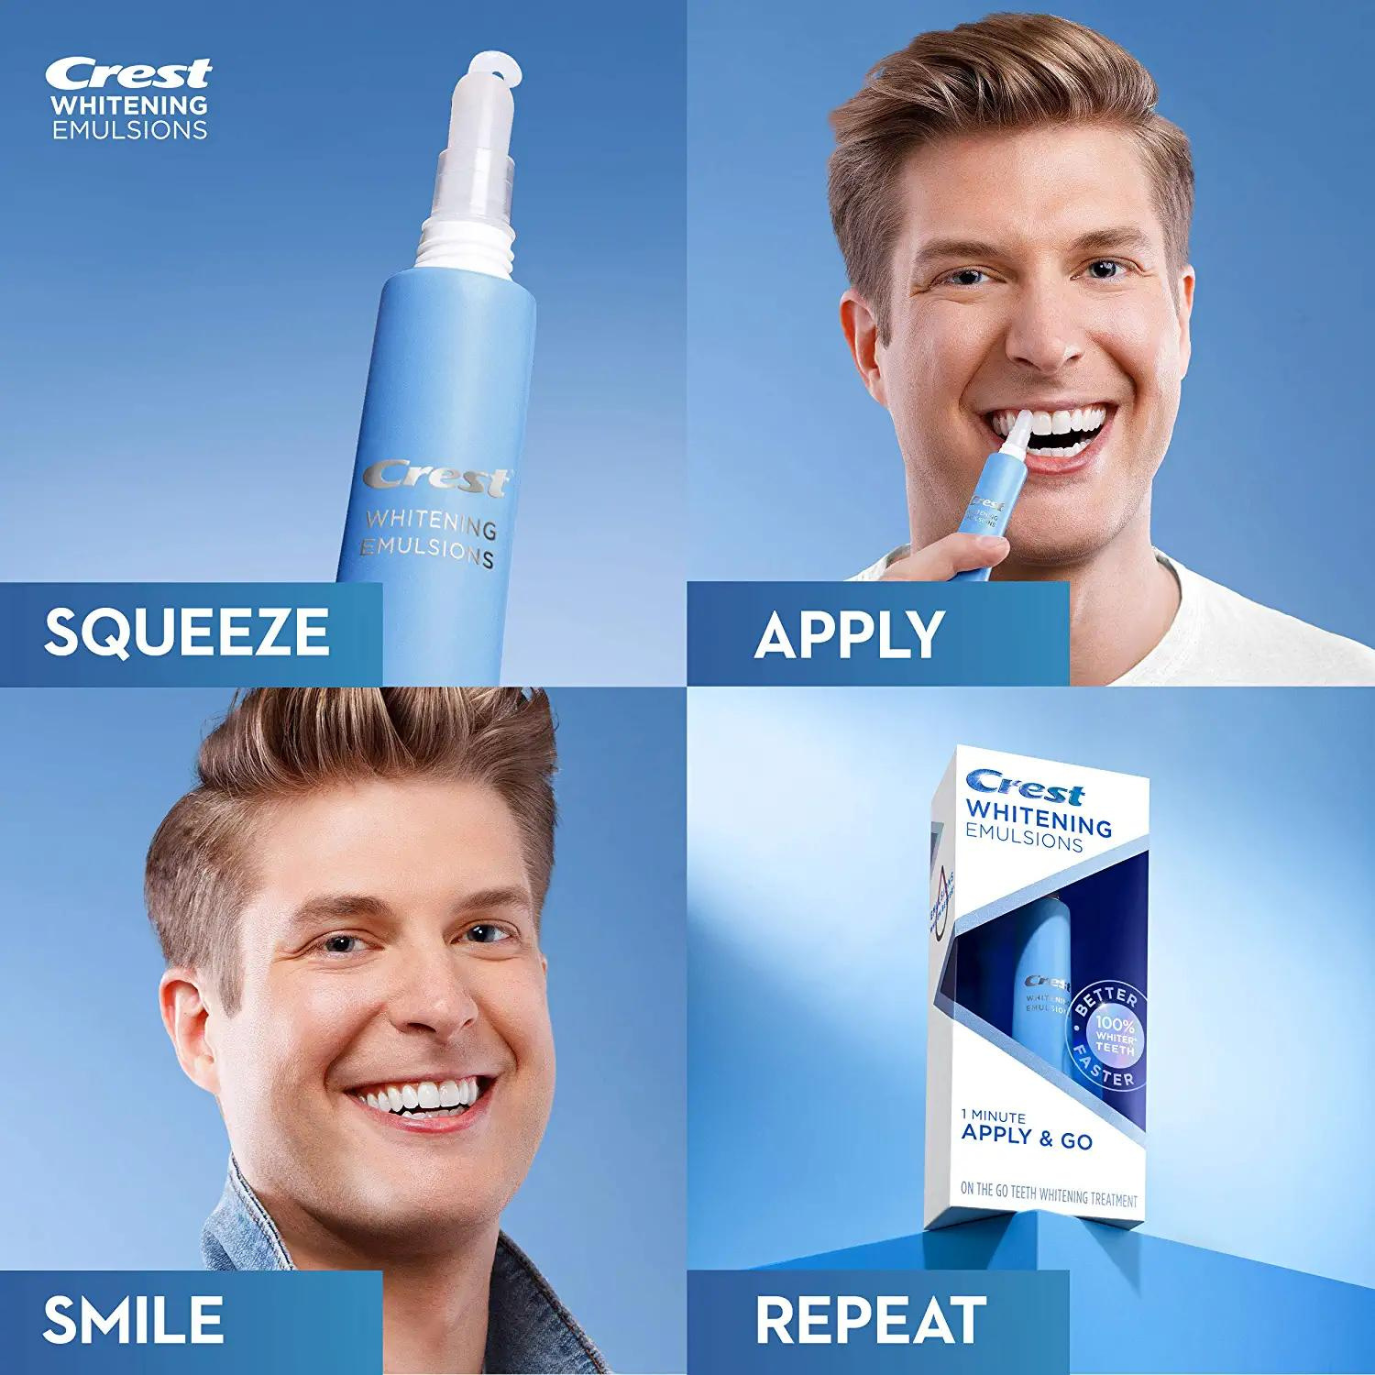 Crest Whitening Emulsions 1 Minute Apply & Go 0.35 Oz On The Go Whitening Treatment PACKAGING MAY VARY